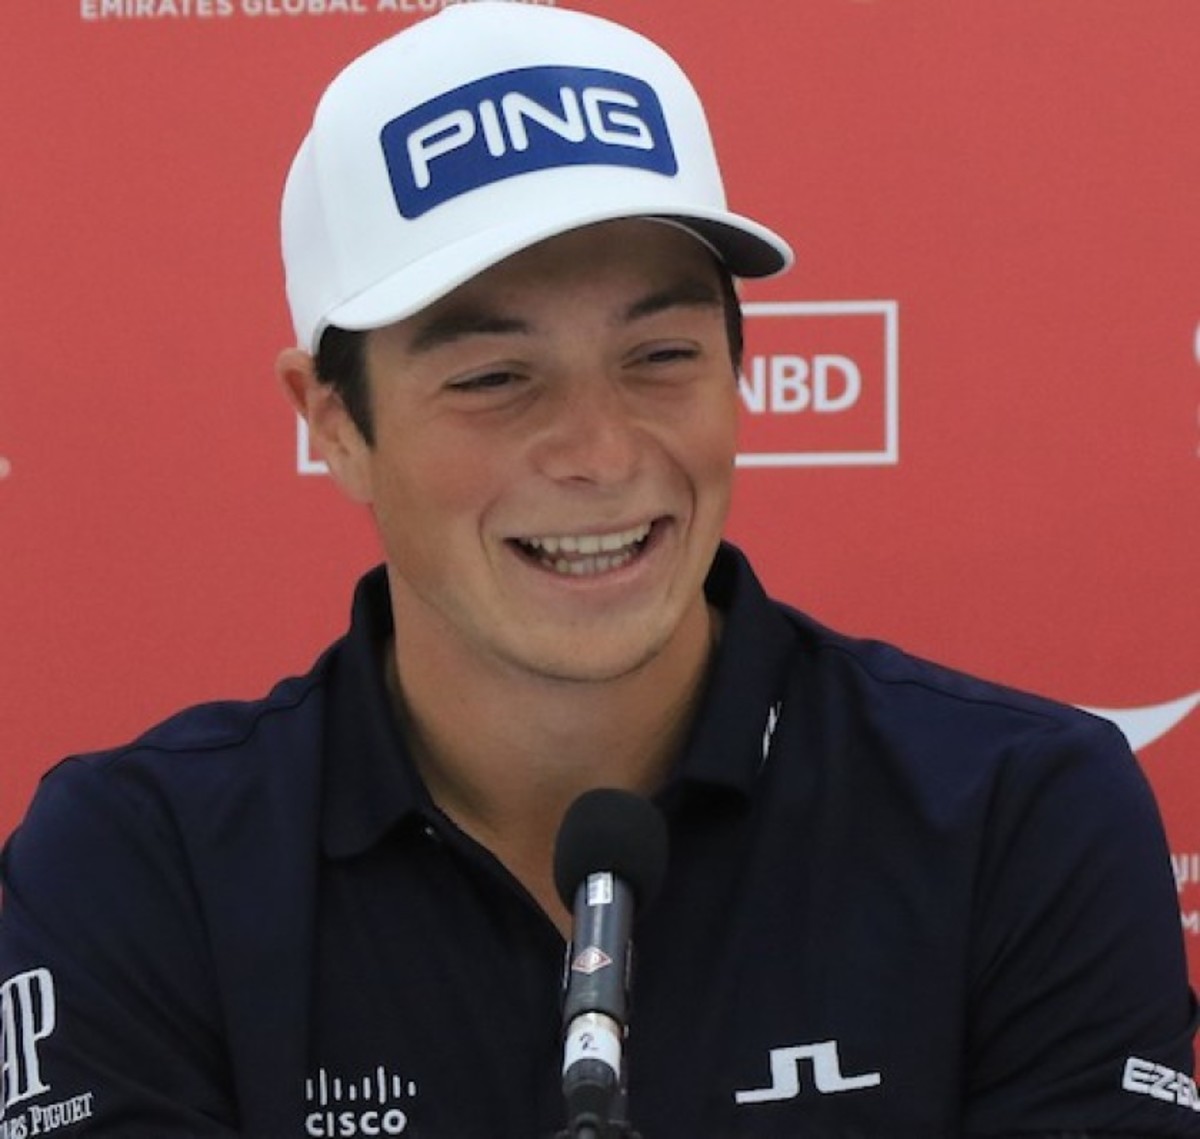 Viktor Hovland wins in only his 12th start as a professional on the PGA Tour. 